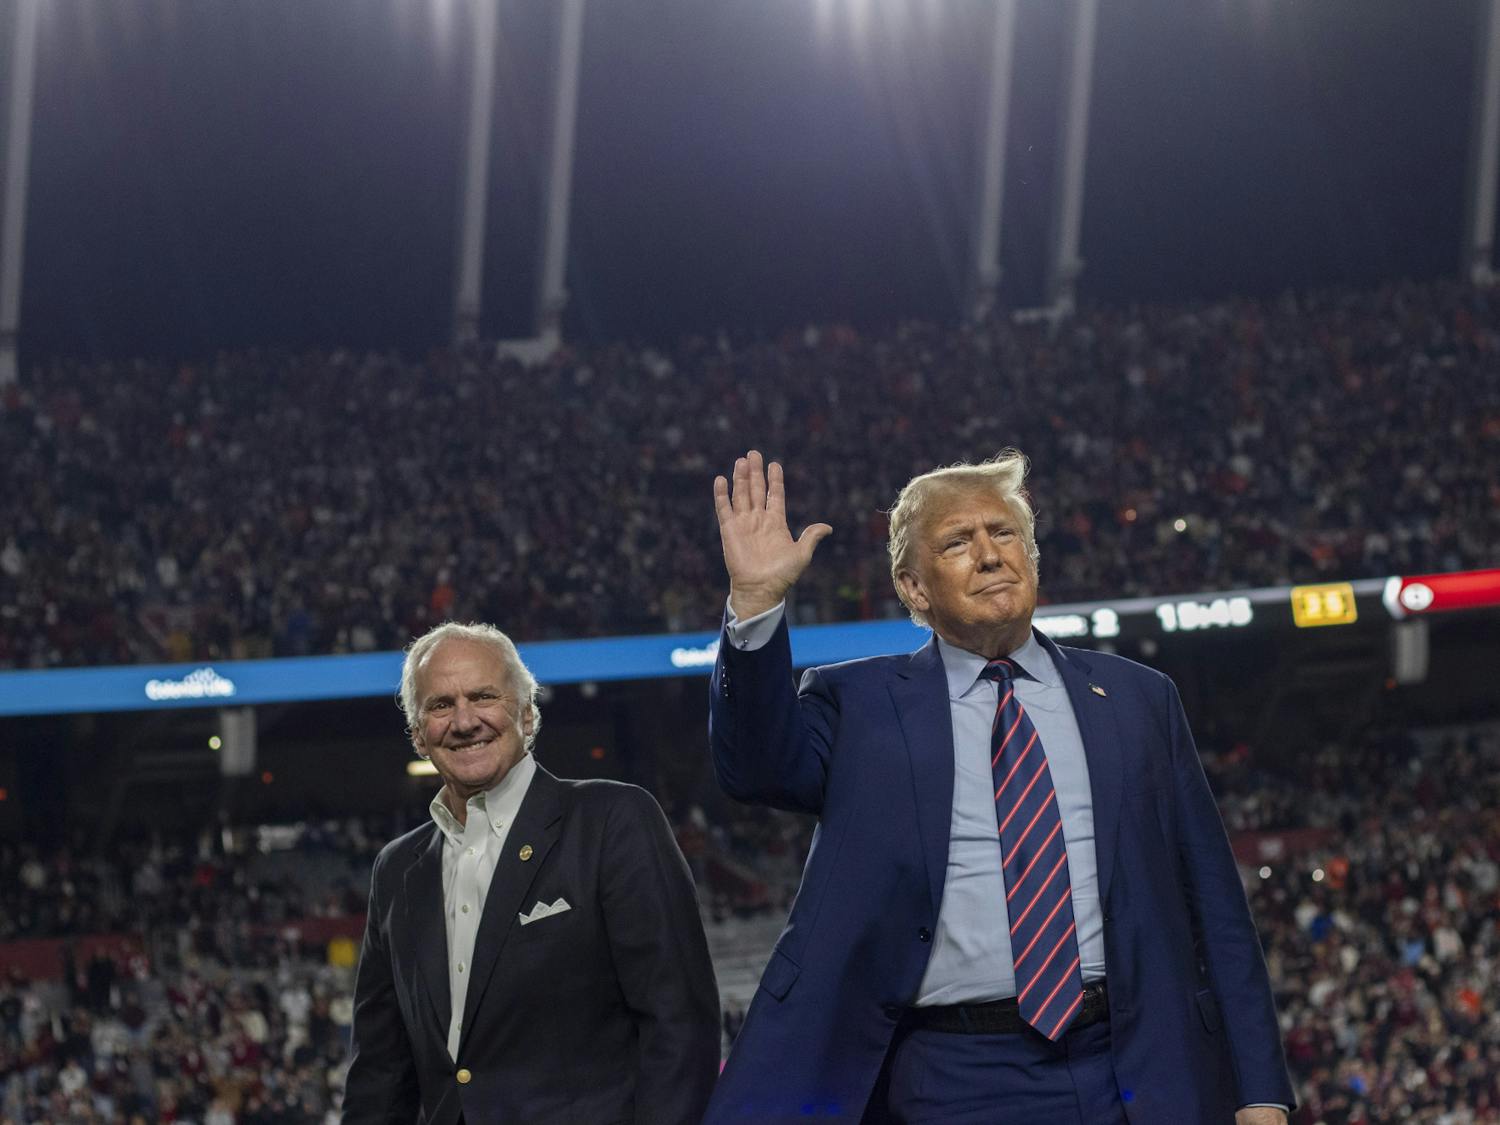 Donald Trump, the 45th president of the United States, waves with South Carolina Gov. Henry McMaster at Williams-Brice Stadium on Nov. 25, 2023. His appearance drew a mixture of praises and boos from the crowd. 